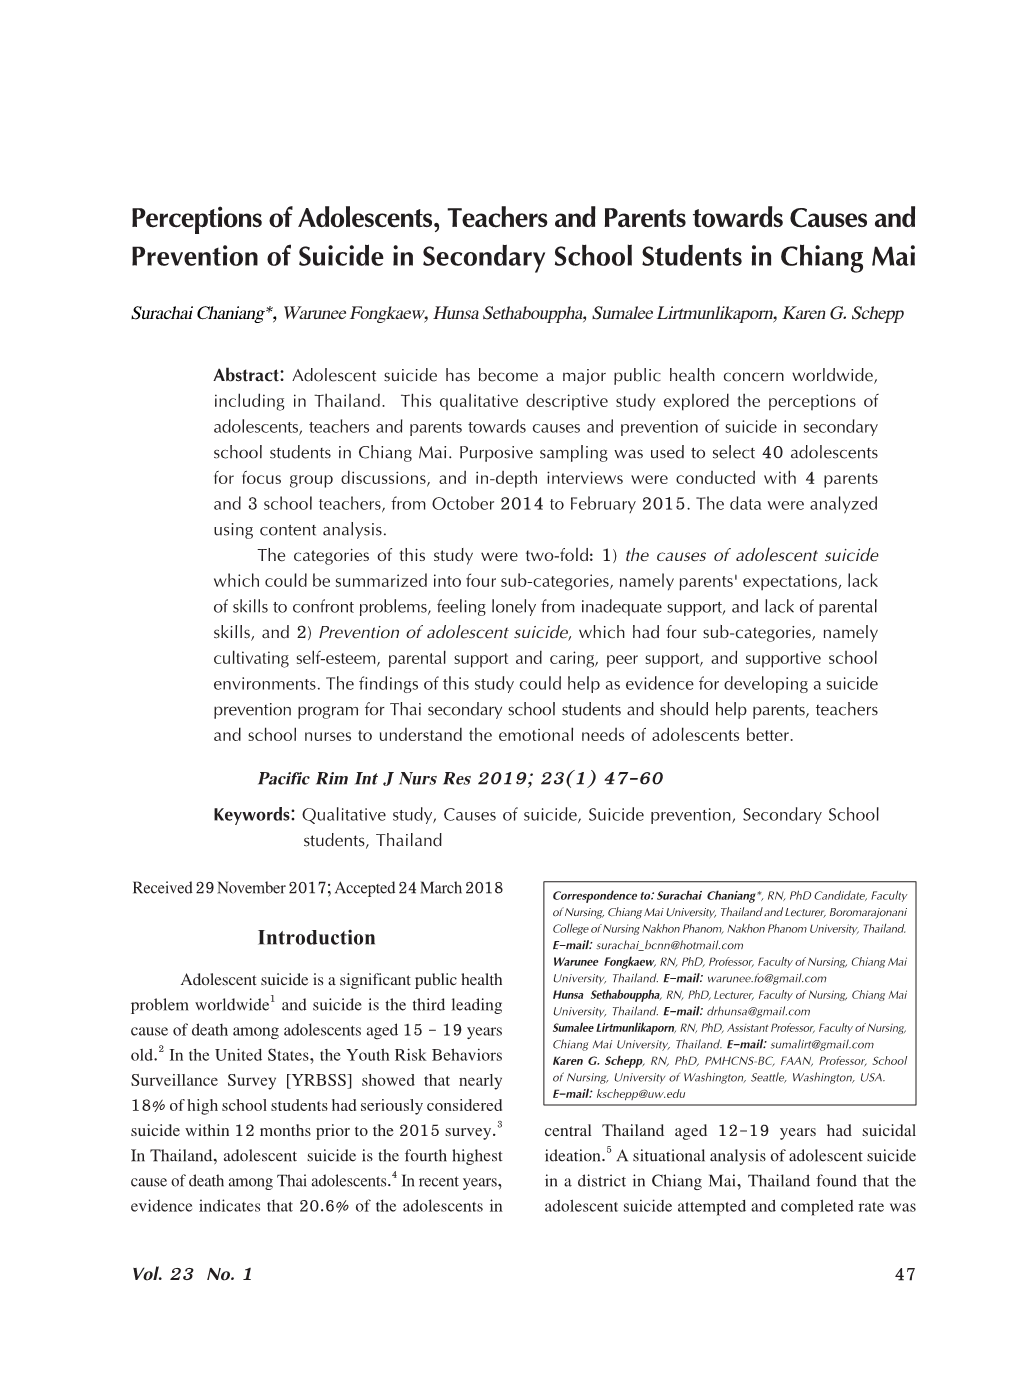 Perceptions of Adolescents, Teachers and Parents Towards Causes And